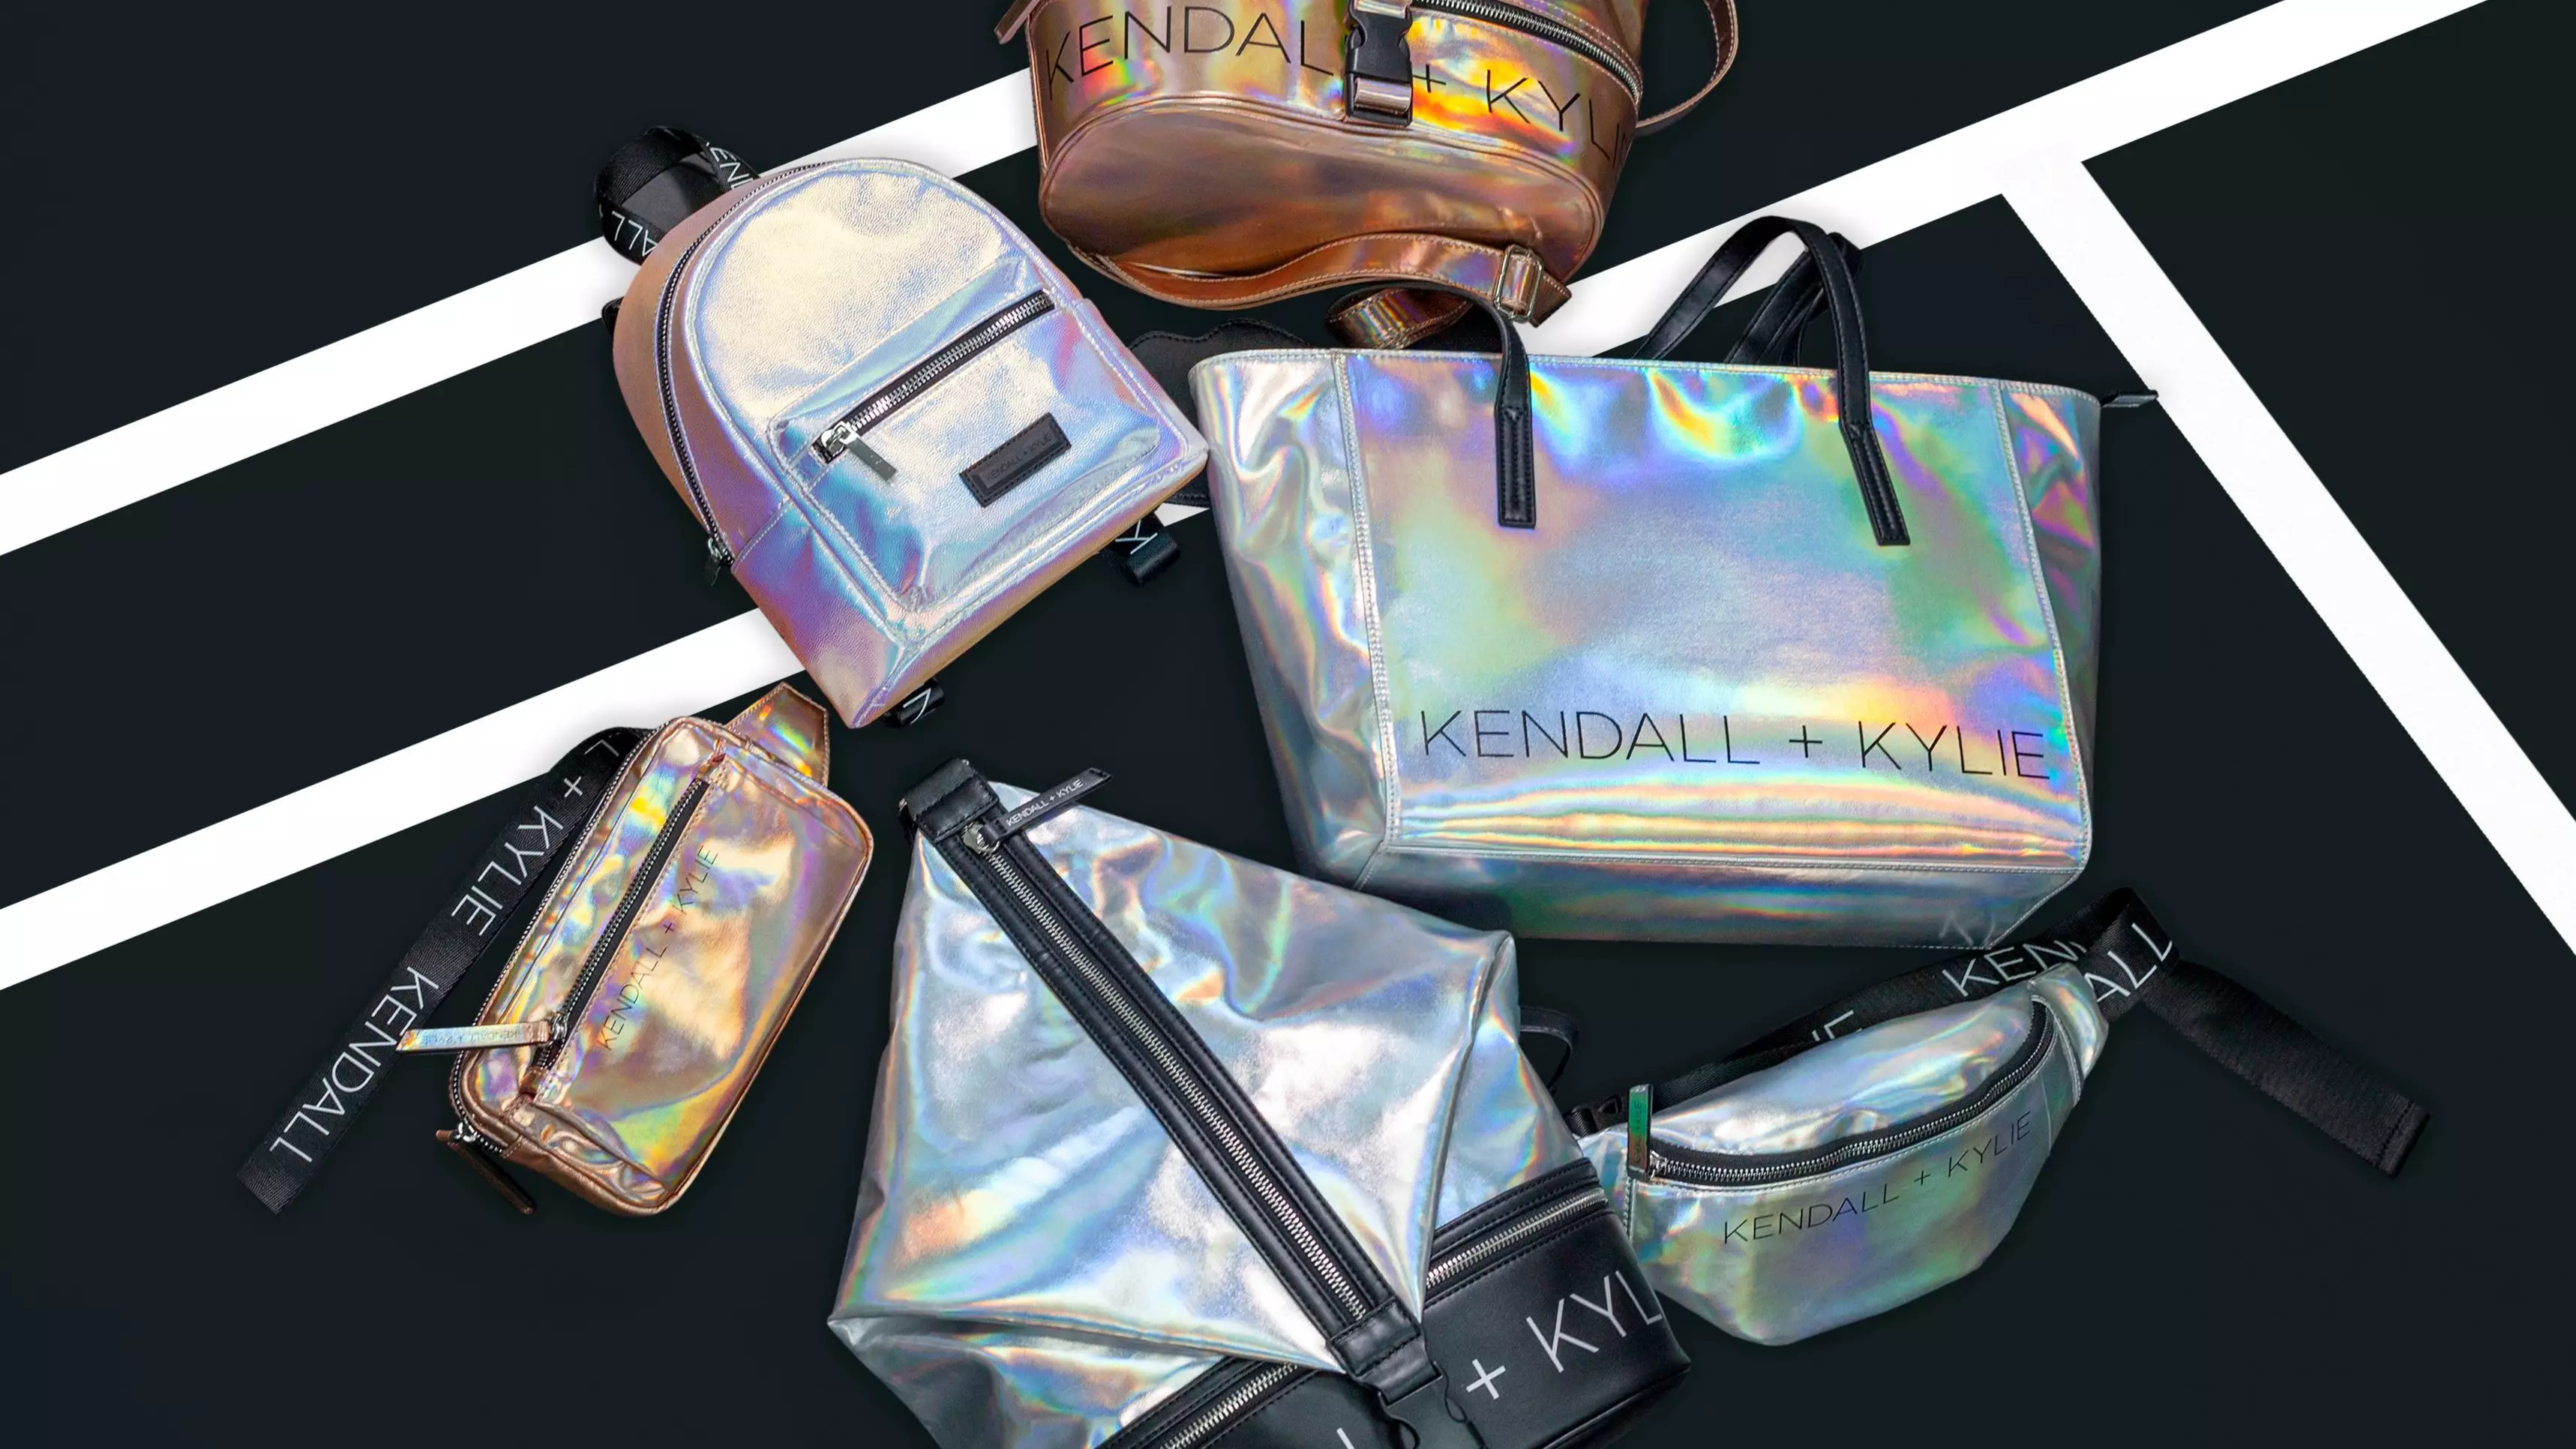 The New KENDALL + KYLIE Handbags Are Finally Here – And We’re Loving Them